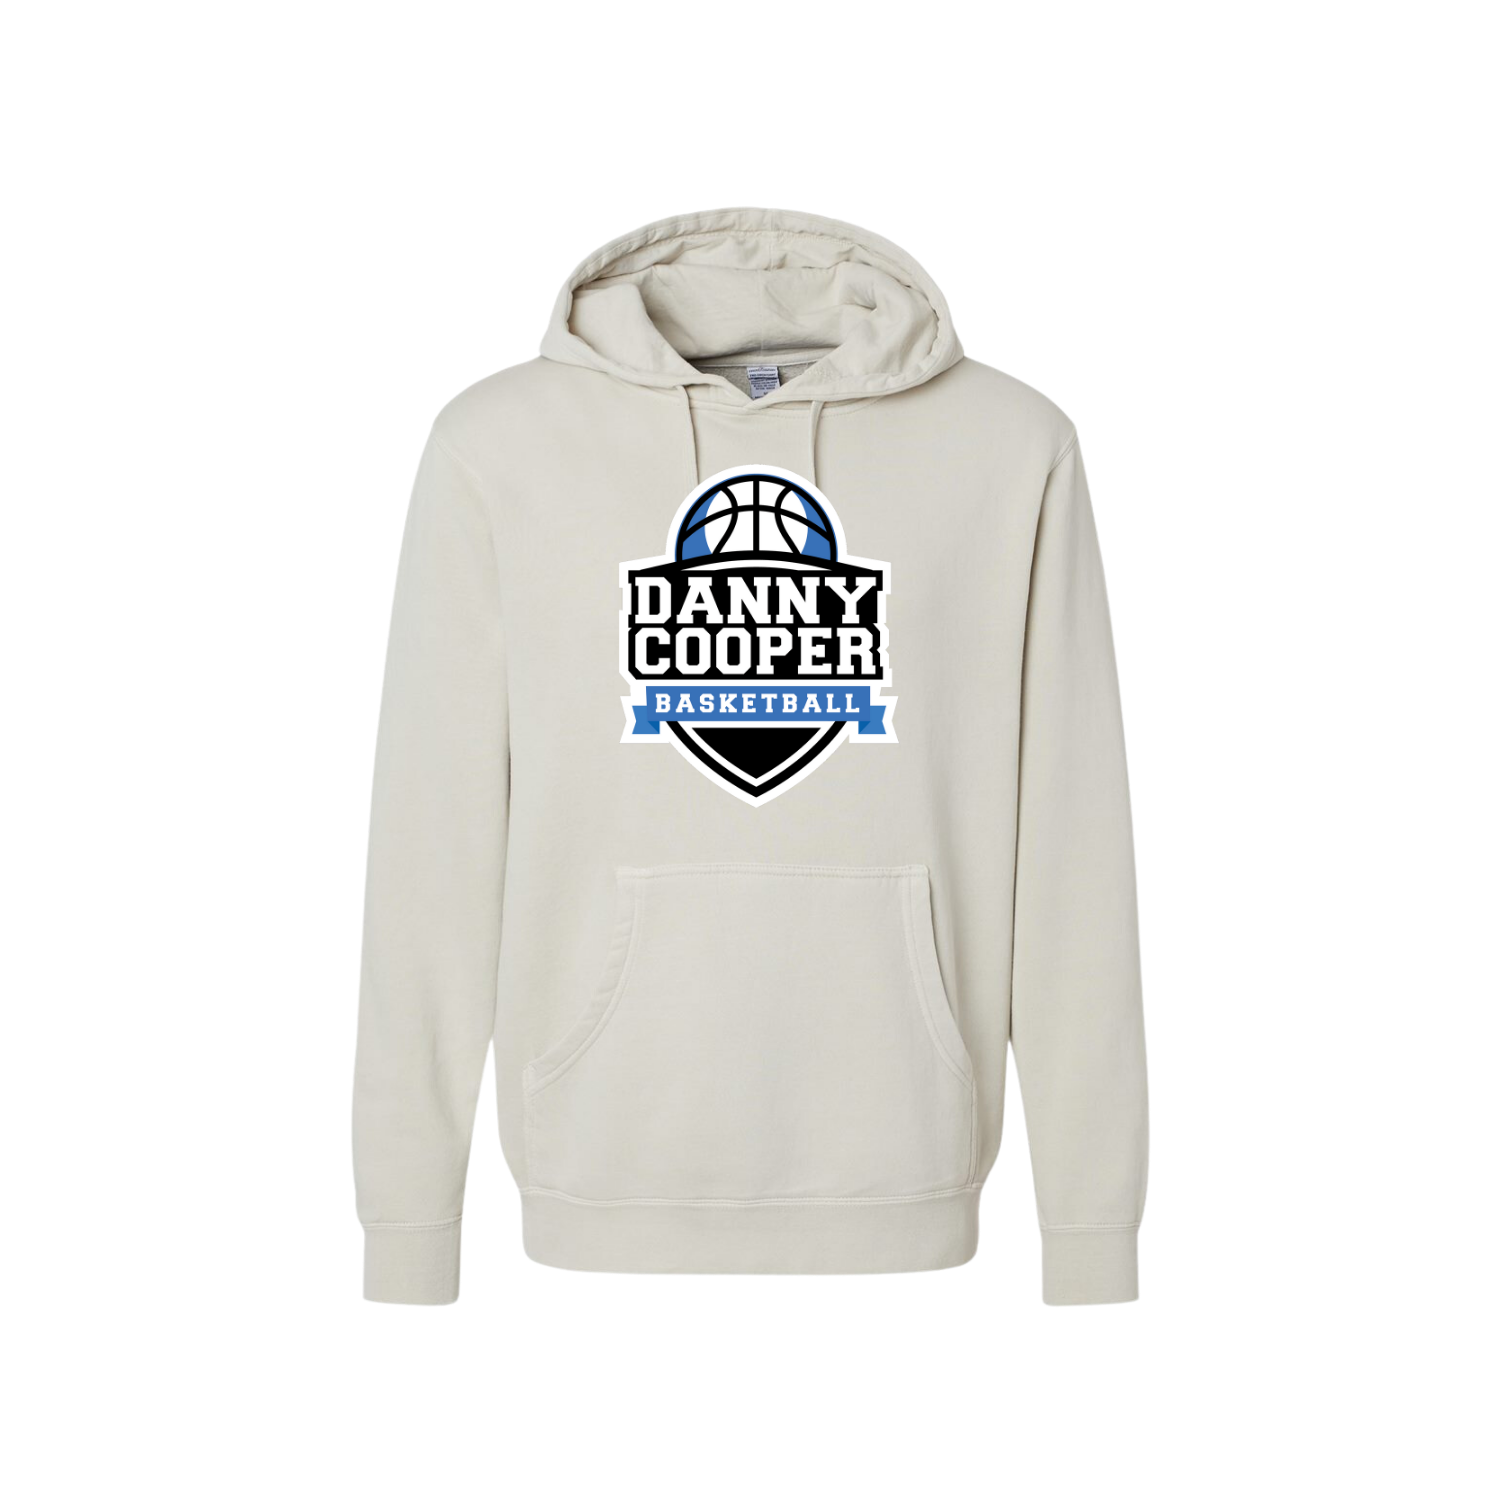 Danny Cooper Basketball - Garment Dyed Hoodie